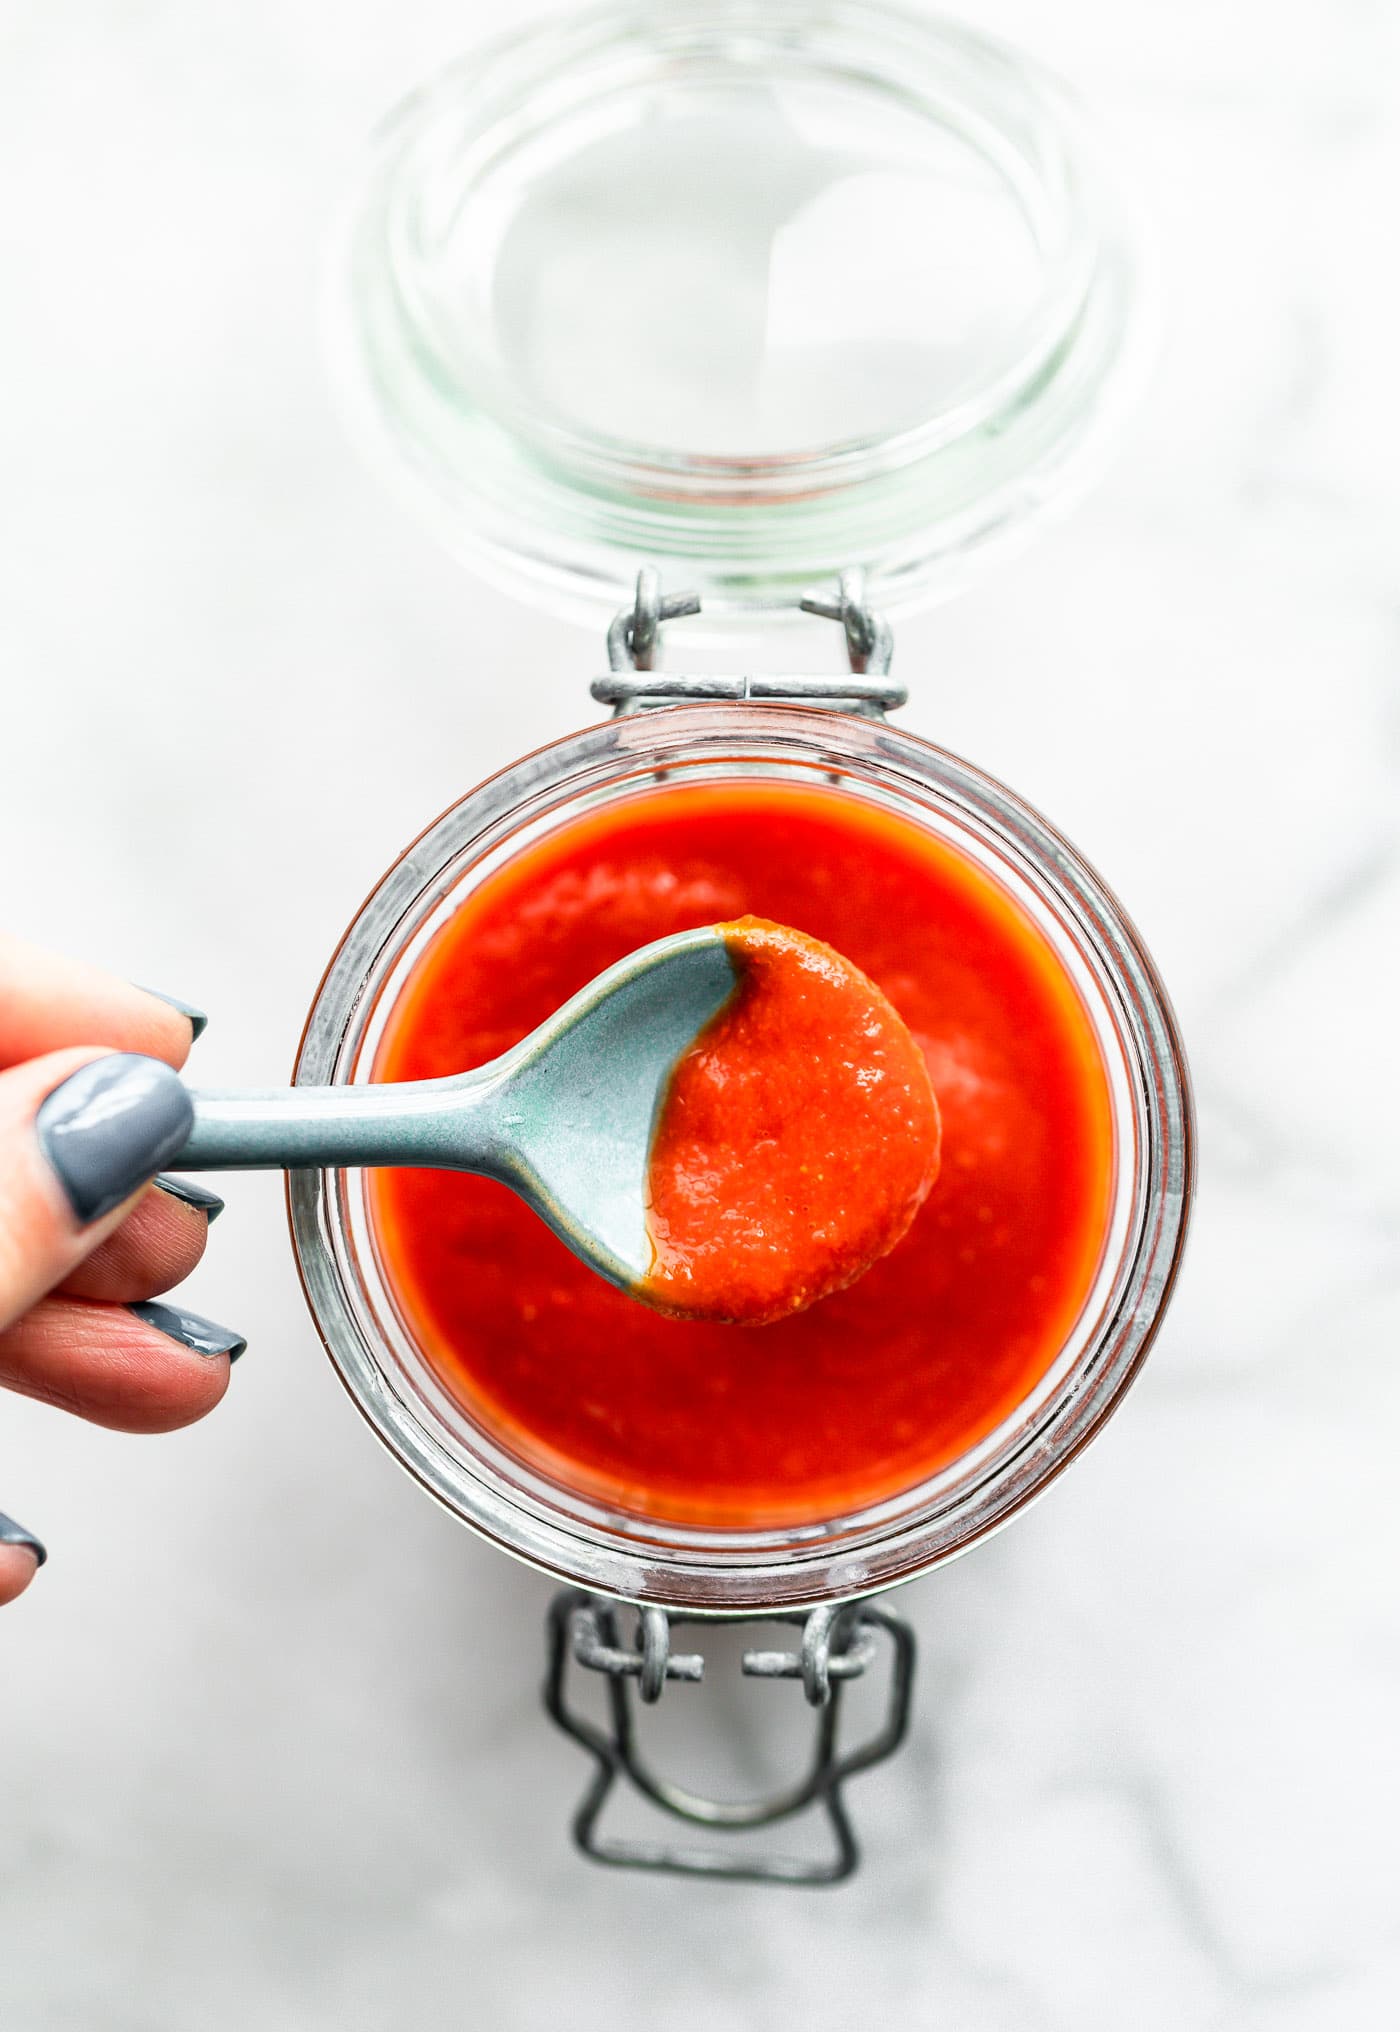 Overhead image of a spoonful of homemade sriracha sauce being lifted out of a storage jar.